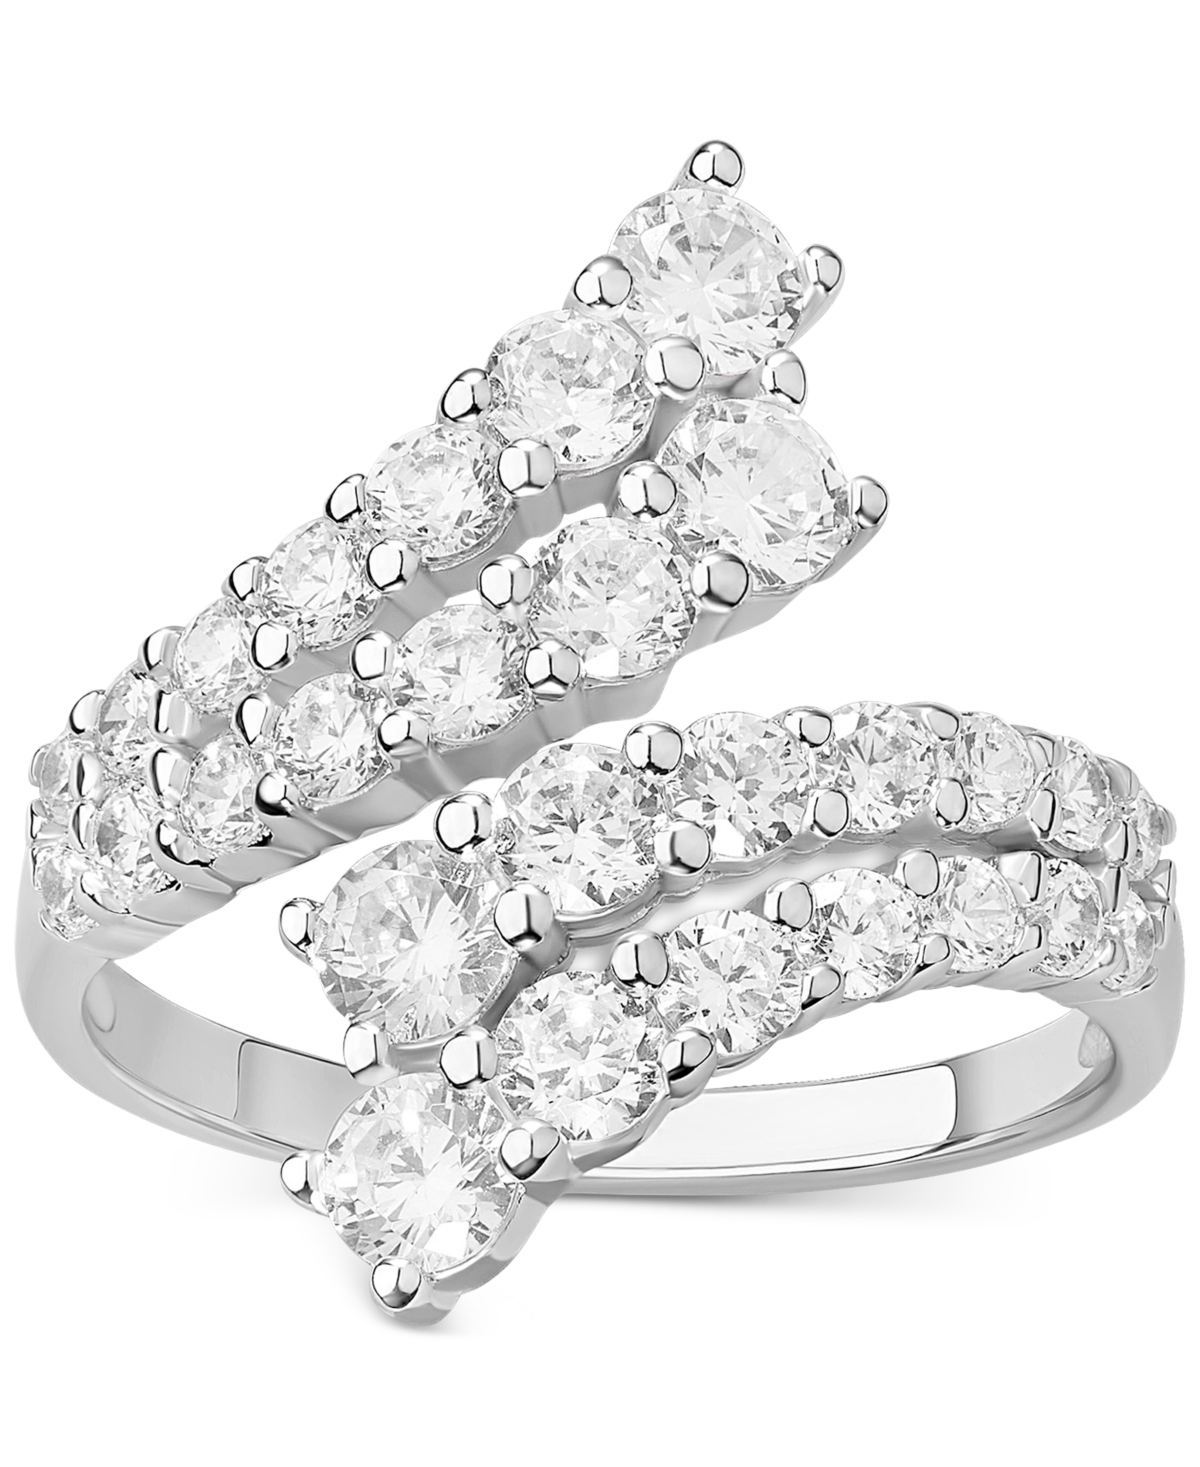 Giani Bernini Cubic Zirconia Bypass Statement Ring In Sterling Silver, Created For Macy's